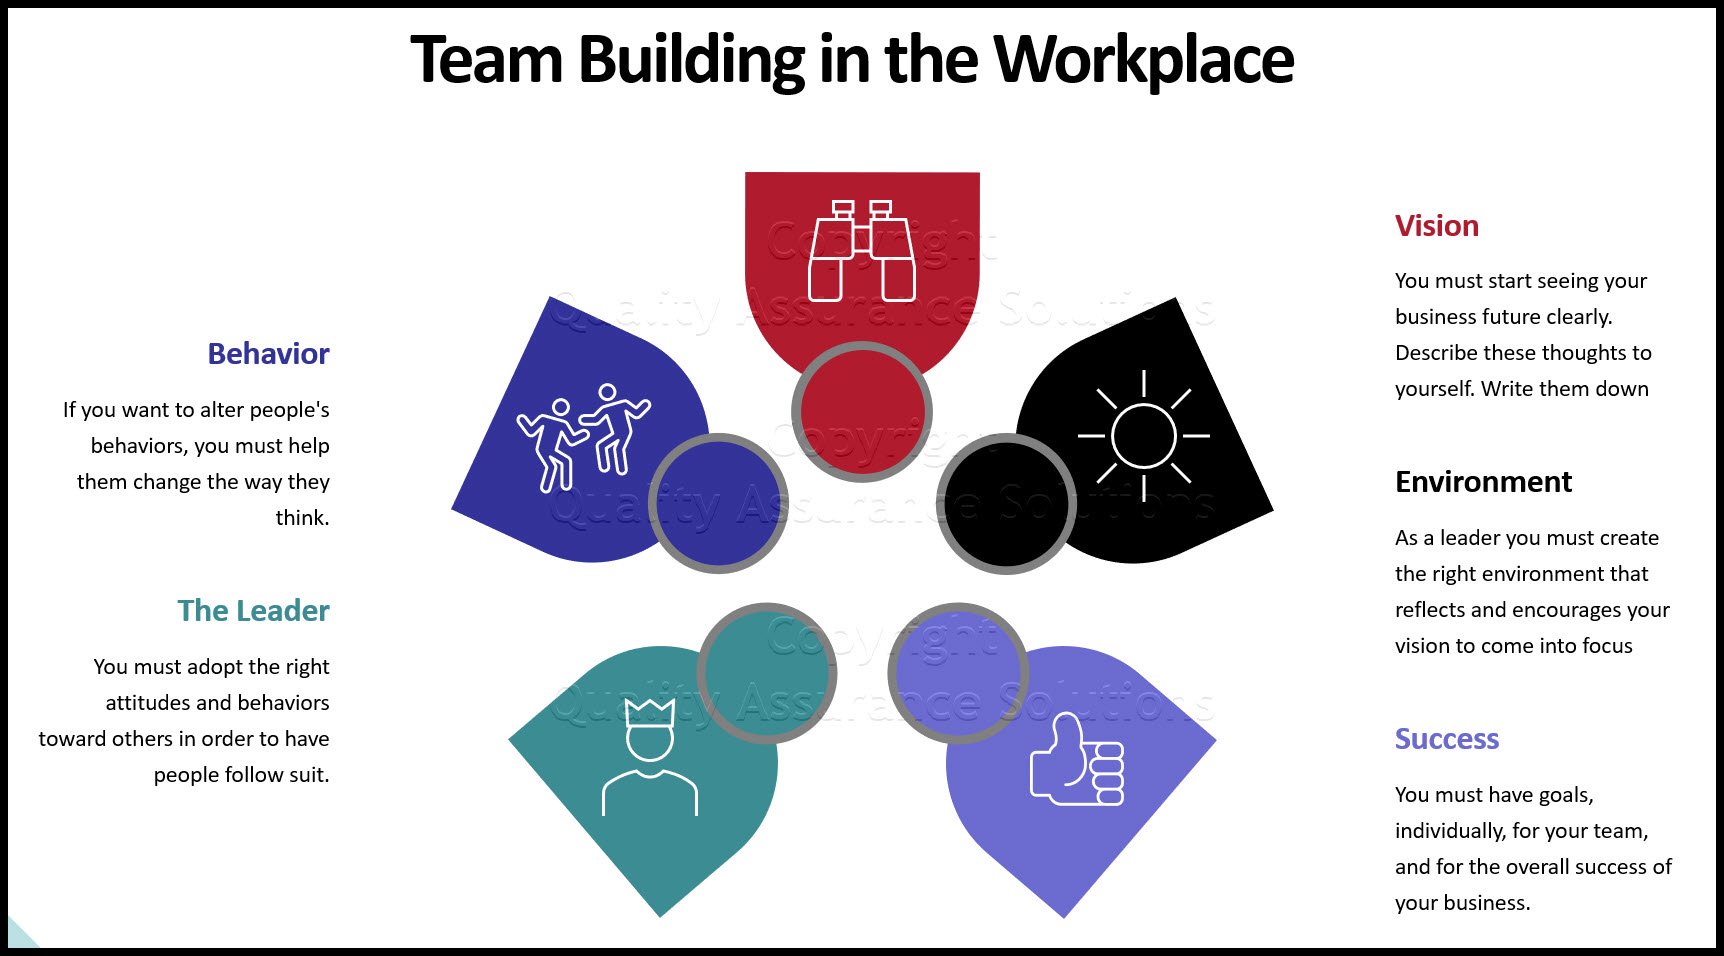 Team building in the workplace starts with the goals you set, the business strategies you implement.